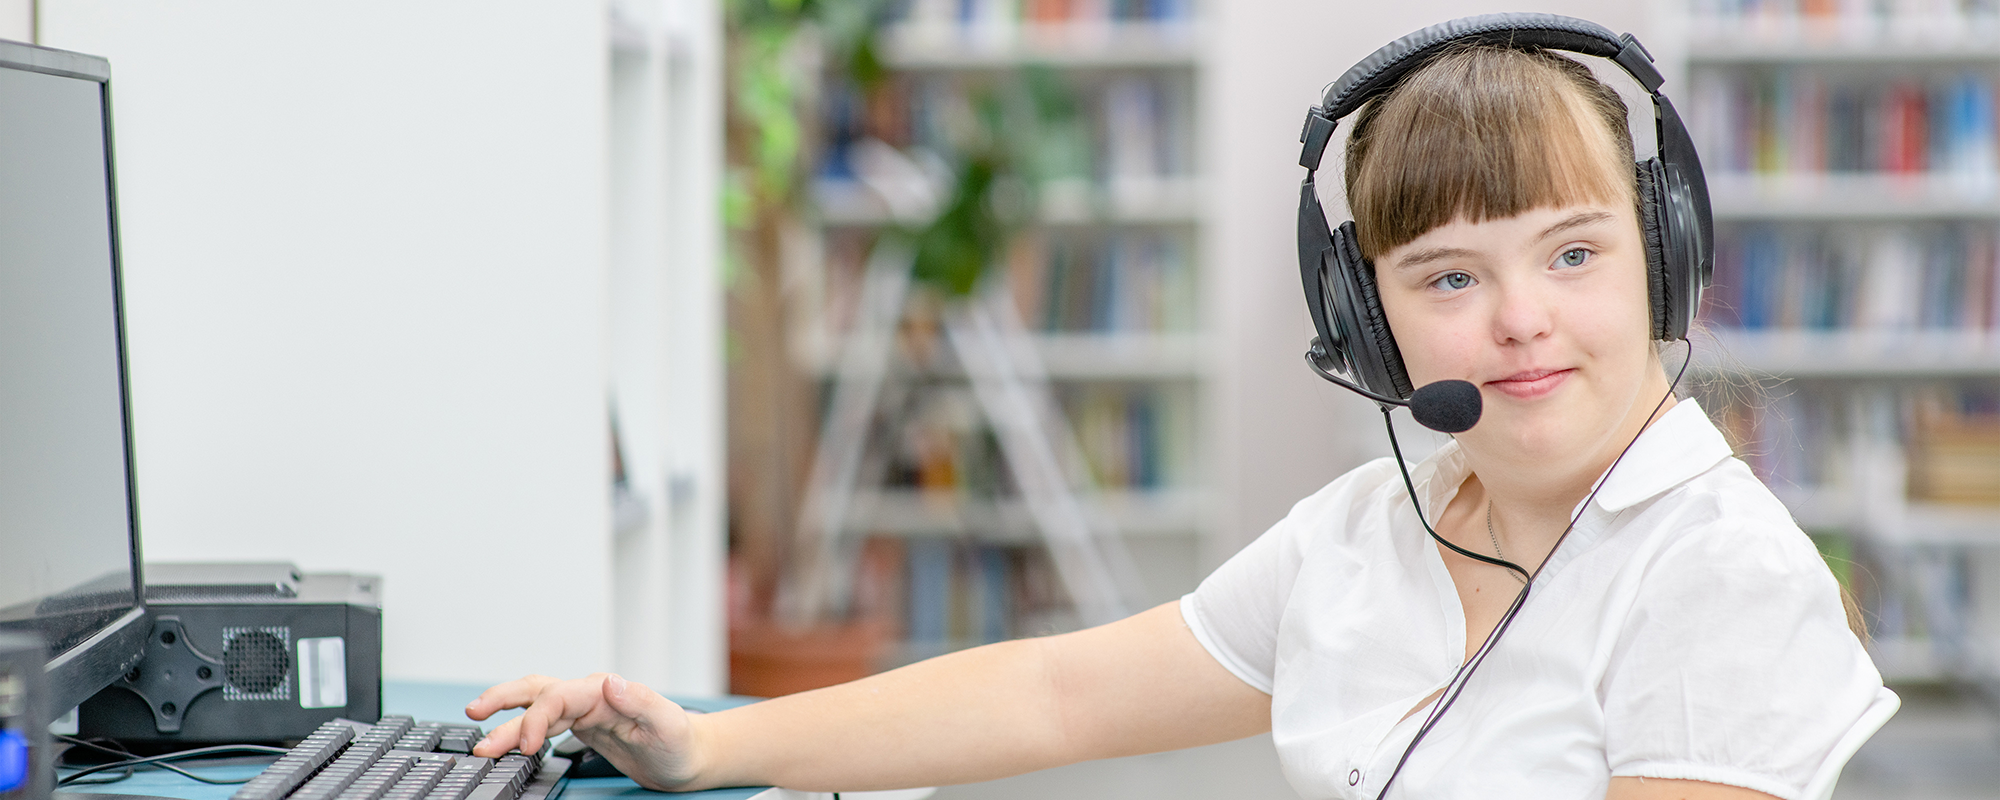 girl wearing a headset using a computer